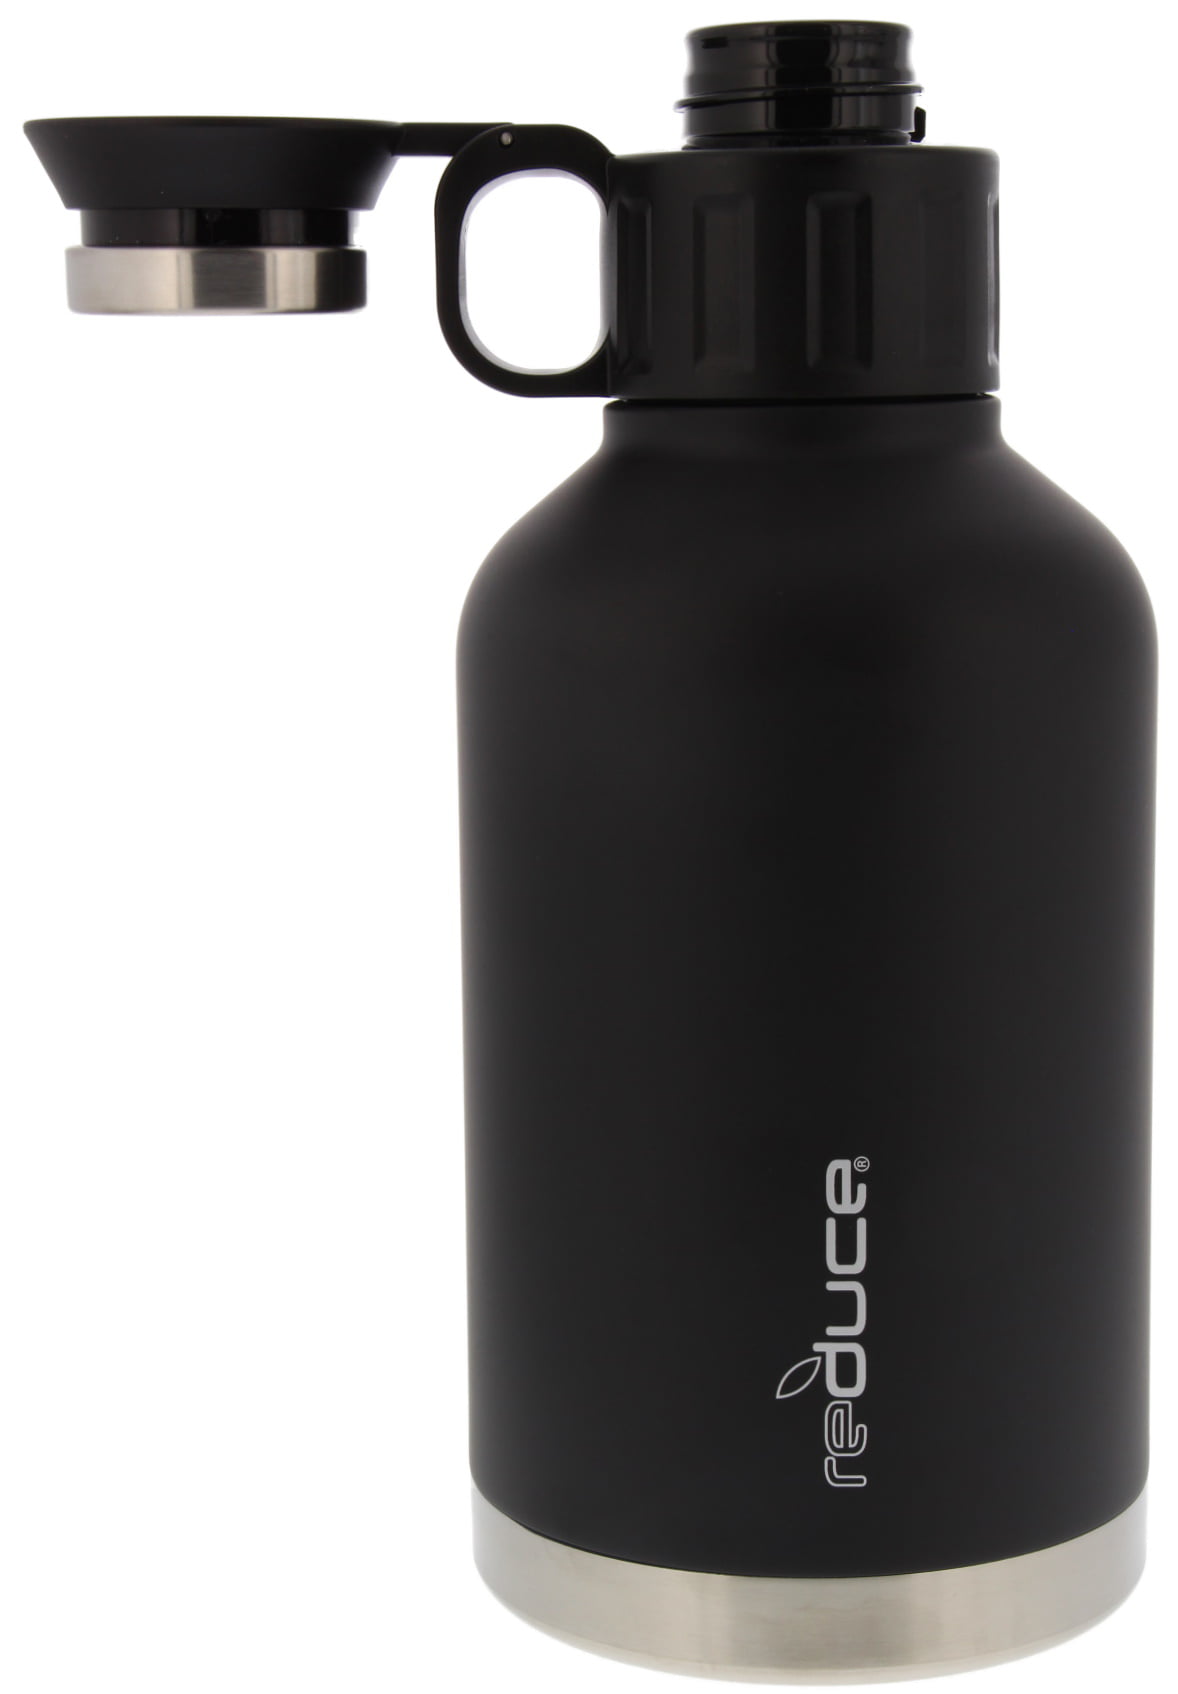 for Hot & Cold Beverages Great for Camping REDUCE Dual-Wall Vacuum Insulated Stainless Steel Canteen and Growler with Leak-Proof Lid Tailgating & Parties 